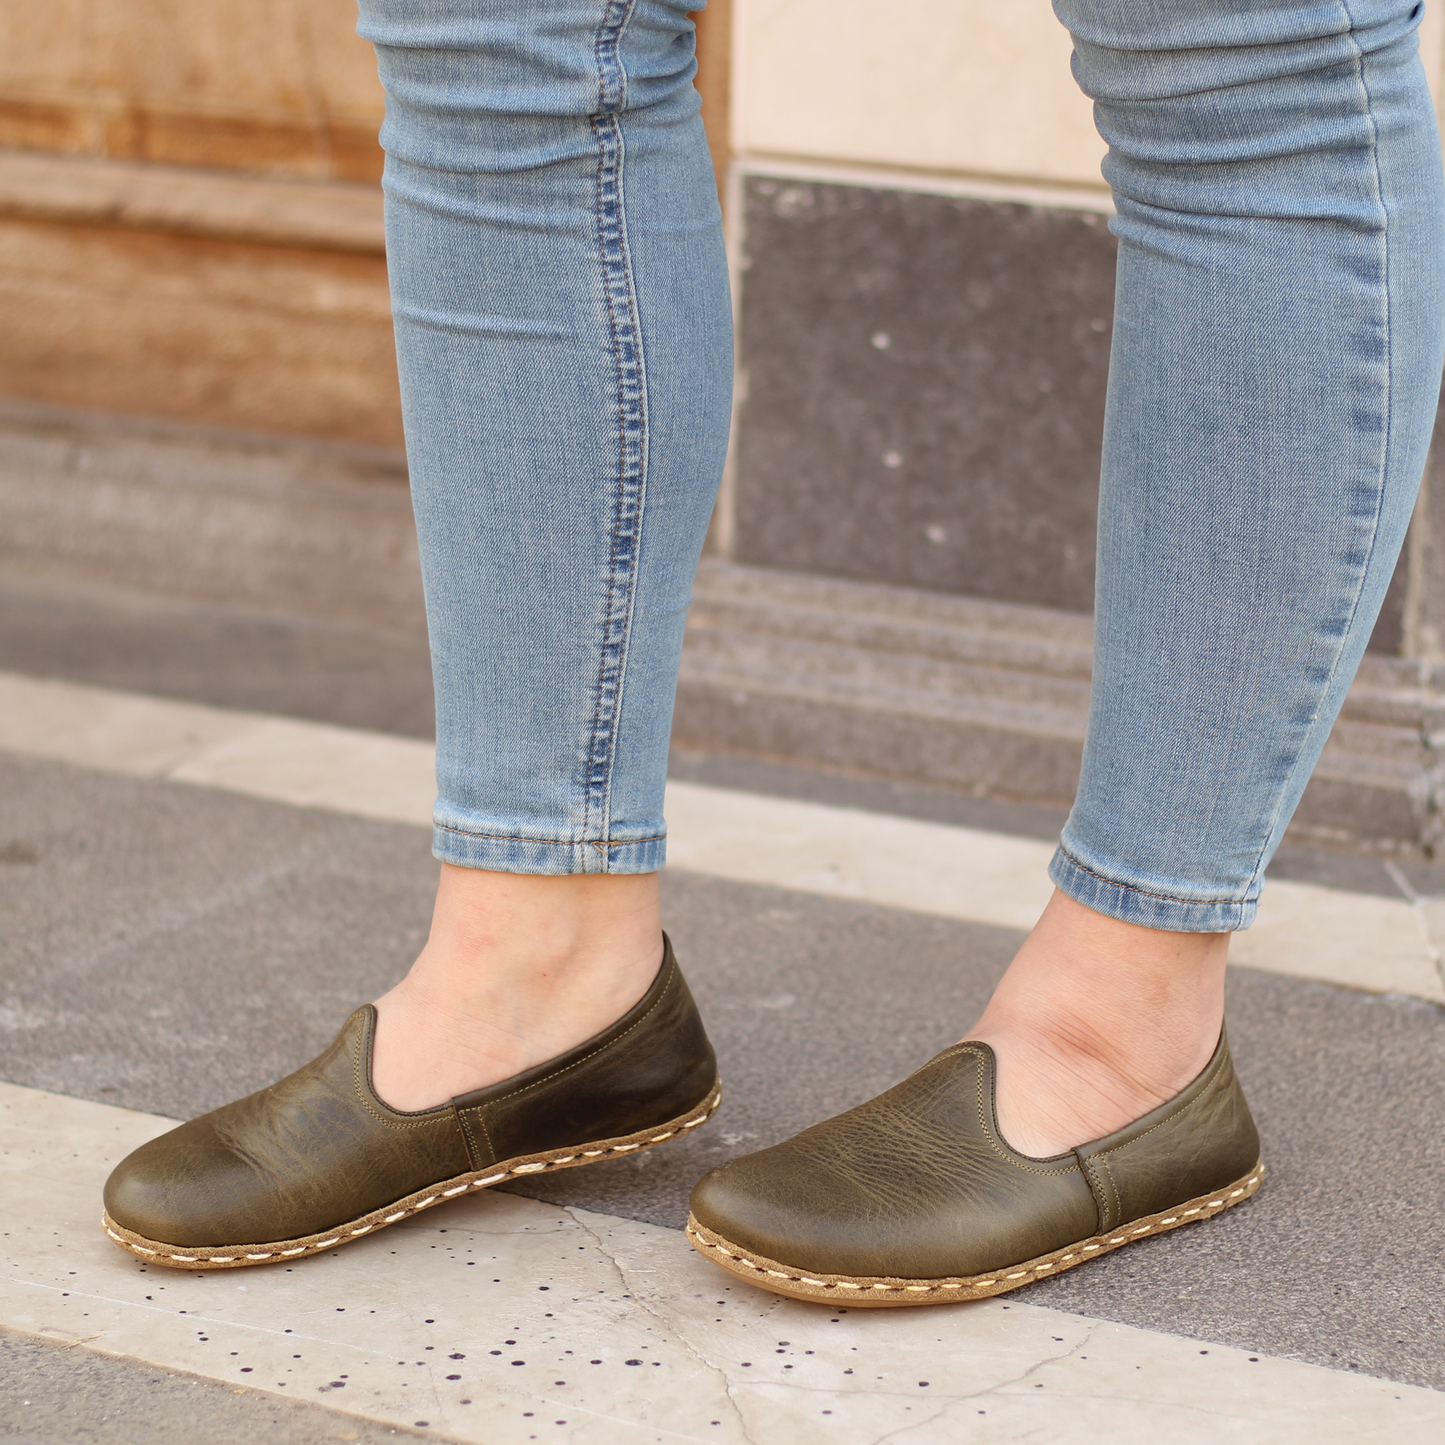 Modern Military Green Barefoot Leather Shoes - Nefes Women